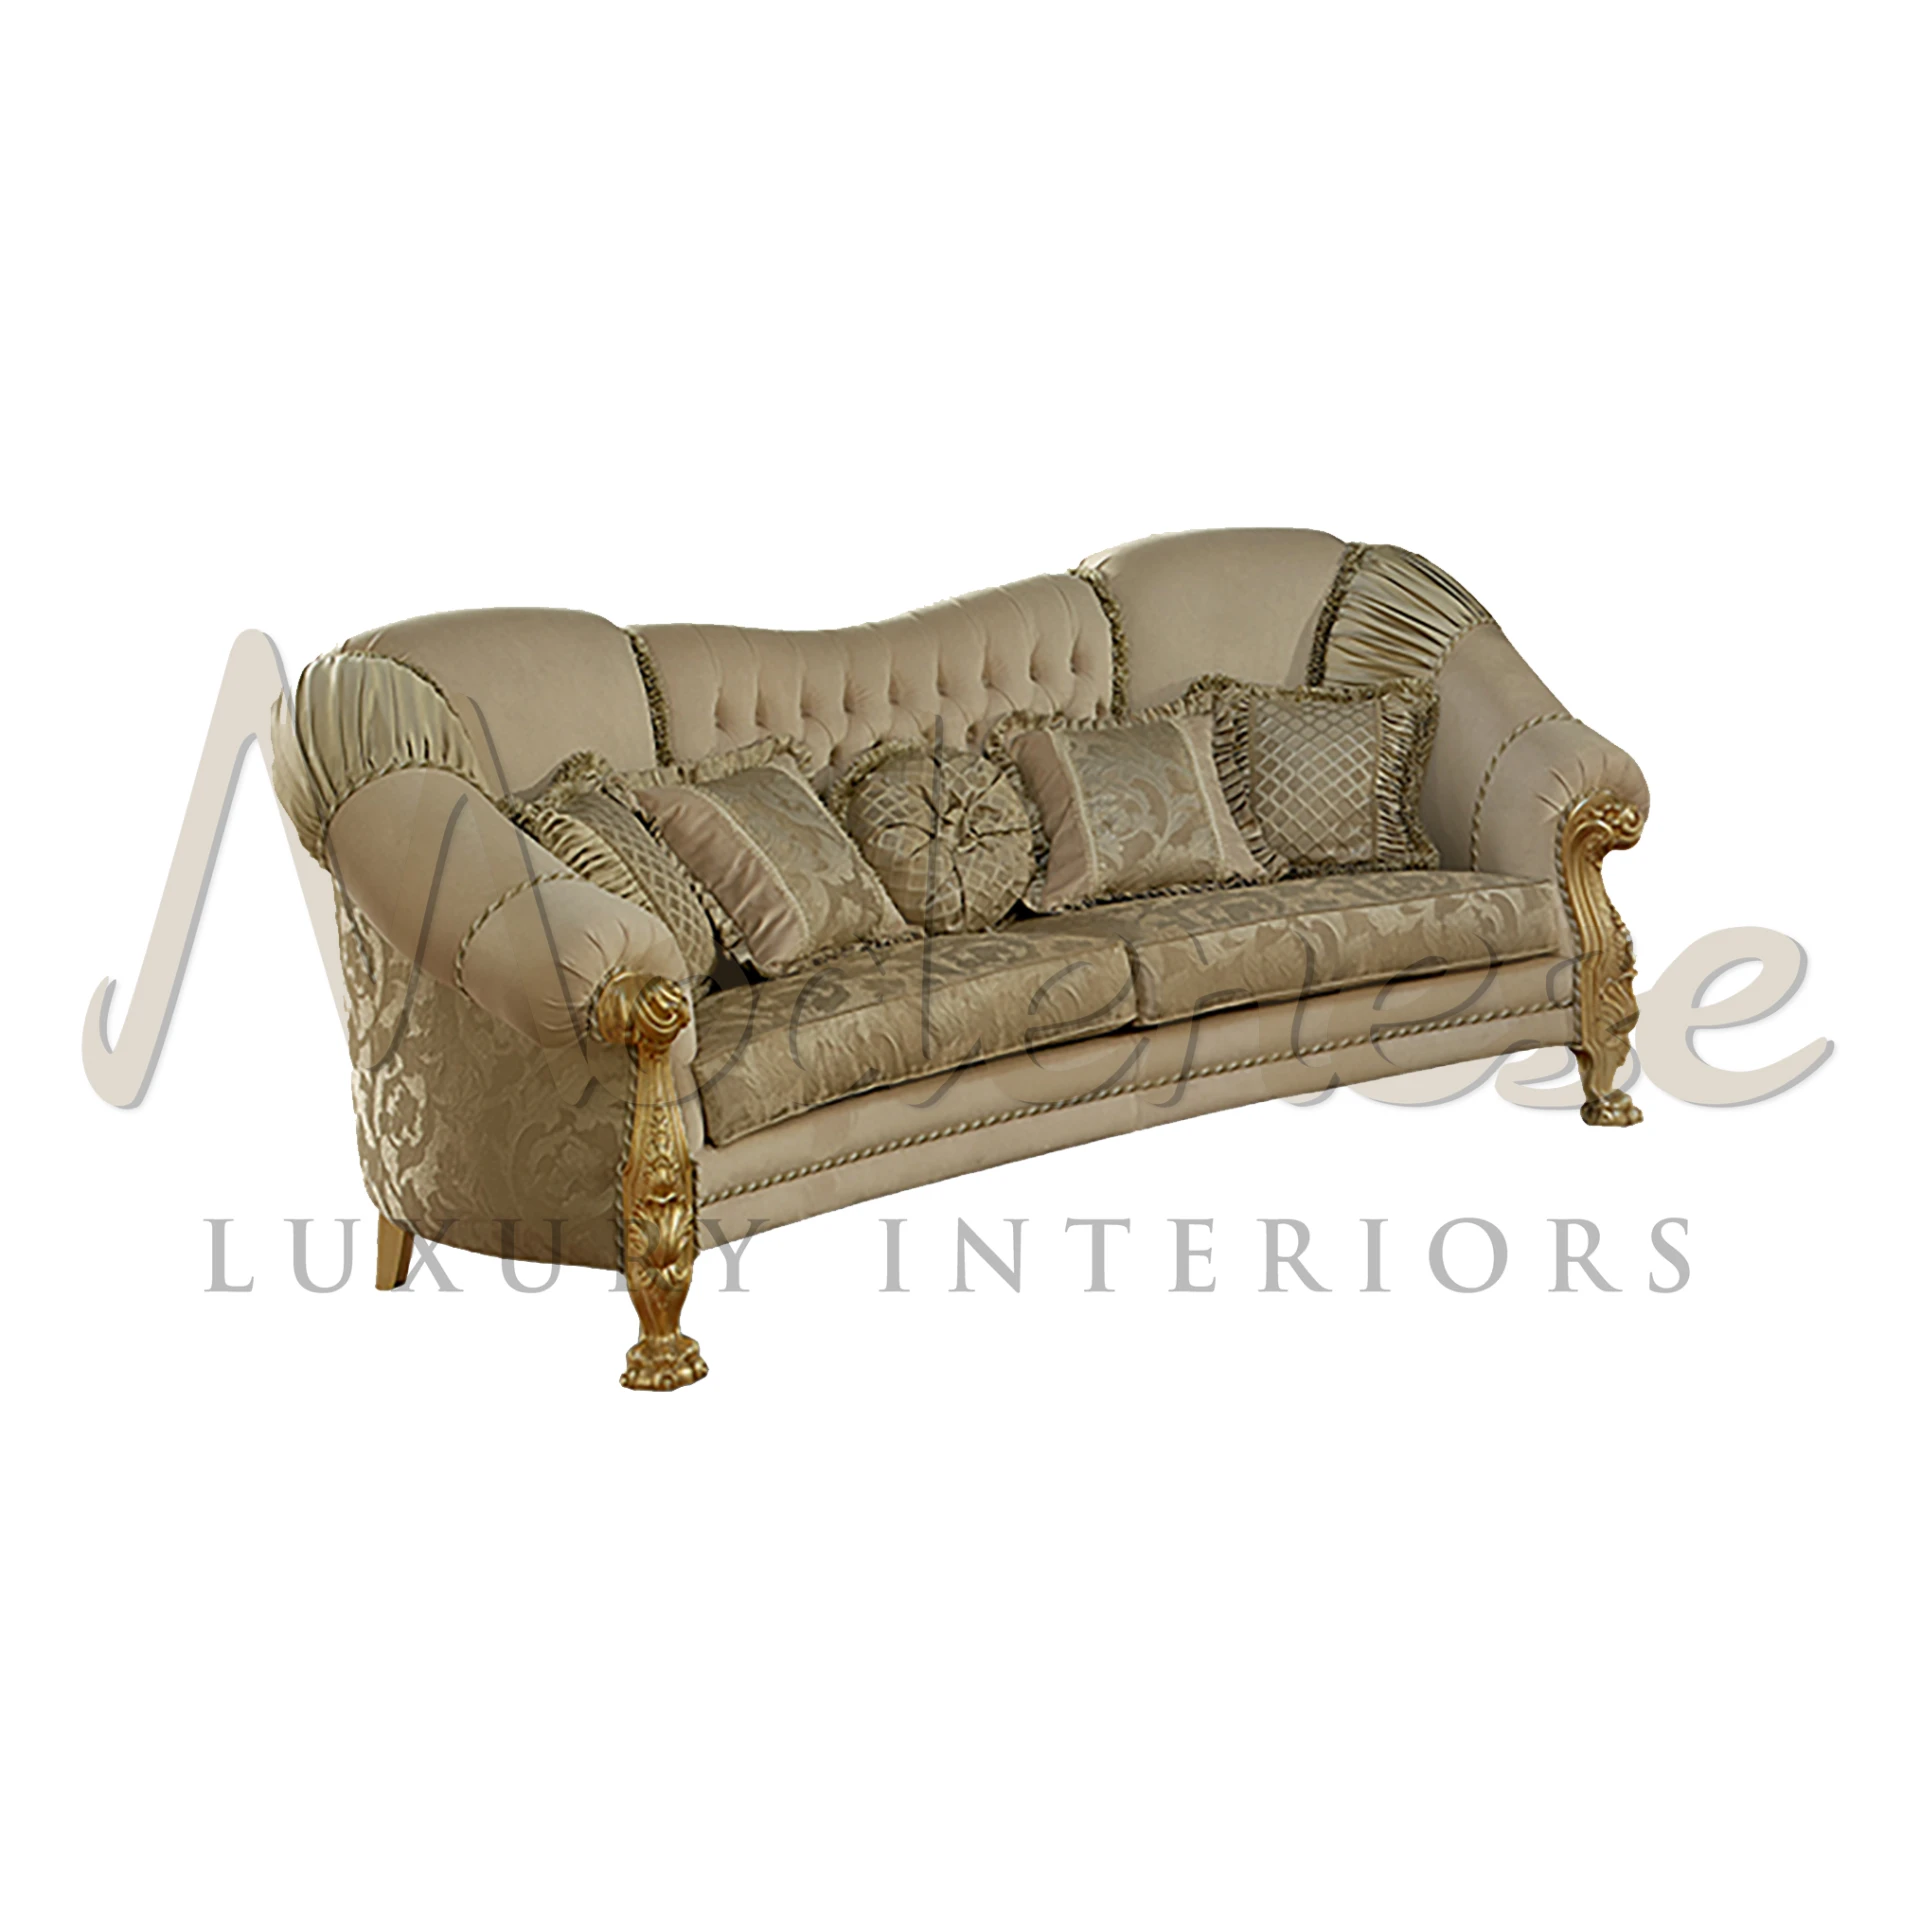 Opulent Gilded Sofa with Golden Beige Fabric: A Regal Centerpiece for Luxurious Living